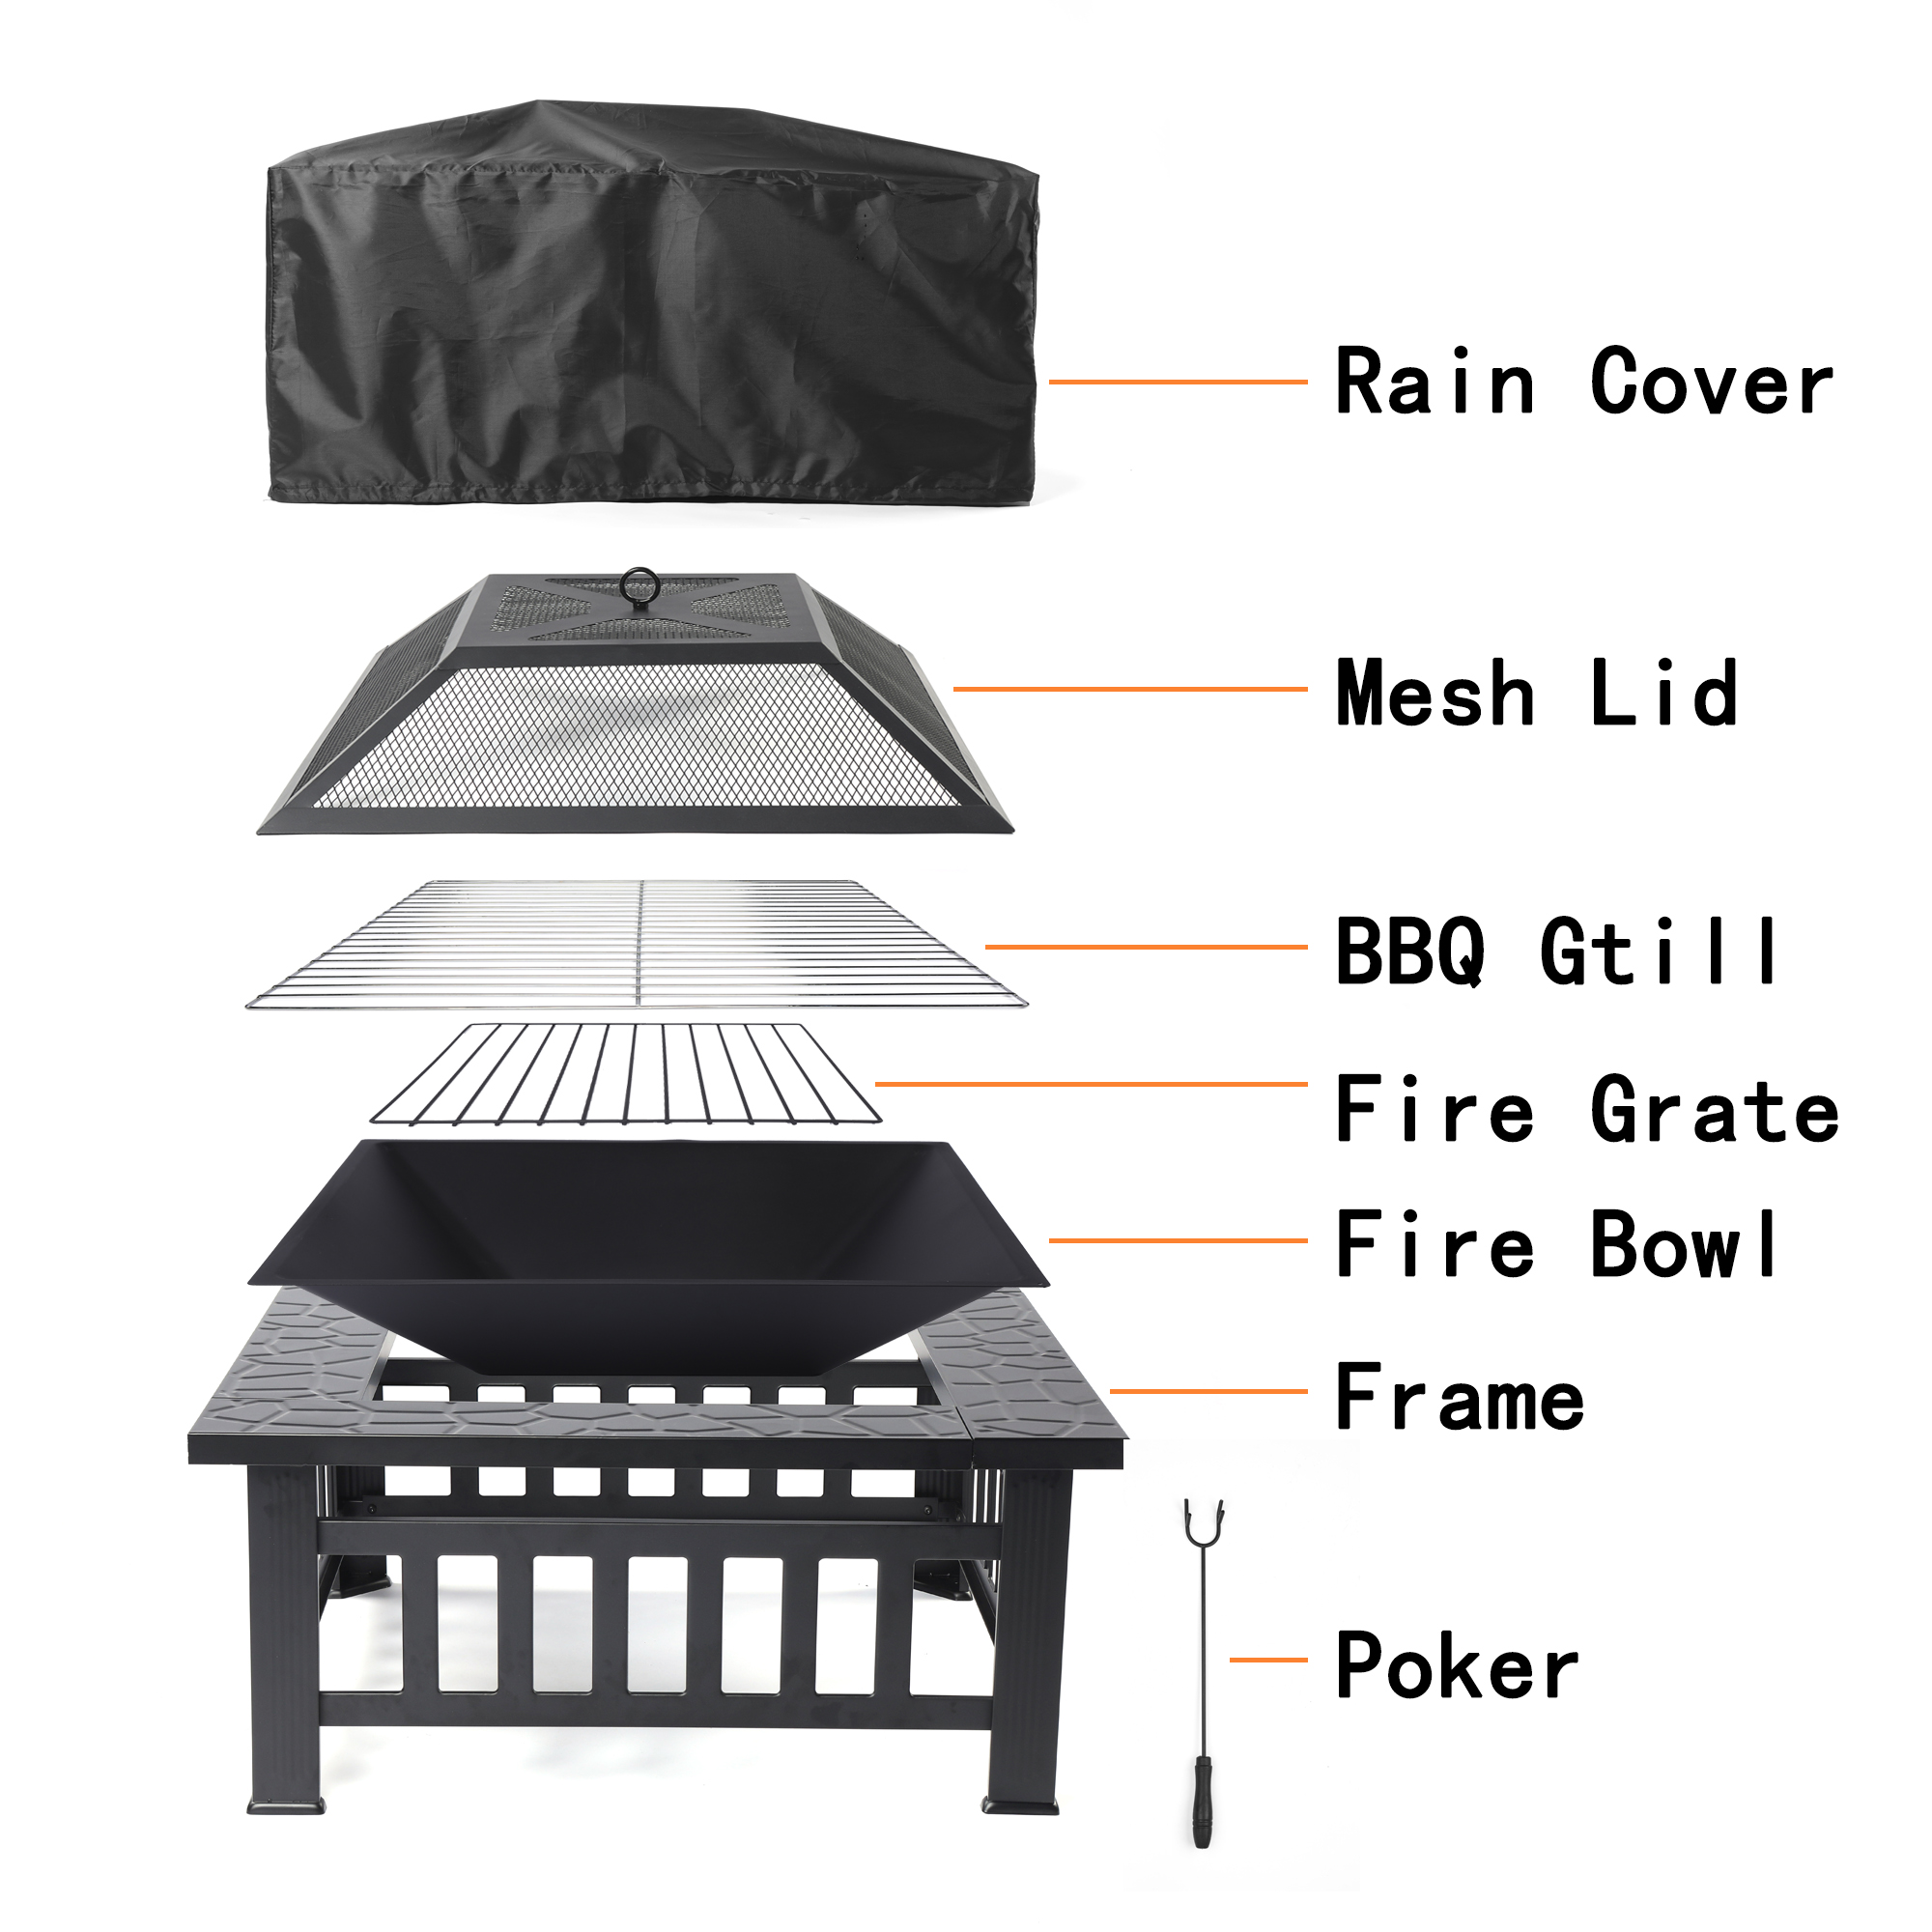 Fire Pits for Outside, 32" Wood Burning Fire Pit Tables with Screen Lid, Poker, BBQ Net, Ice Tray, Food Clip and Cover, Backyard Patio Garden Outdoor Fire Pit/Ice Pit/BBQ Fire Pit, Black - image 4 of 10